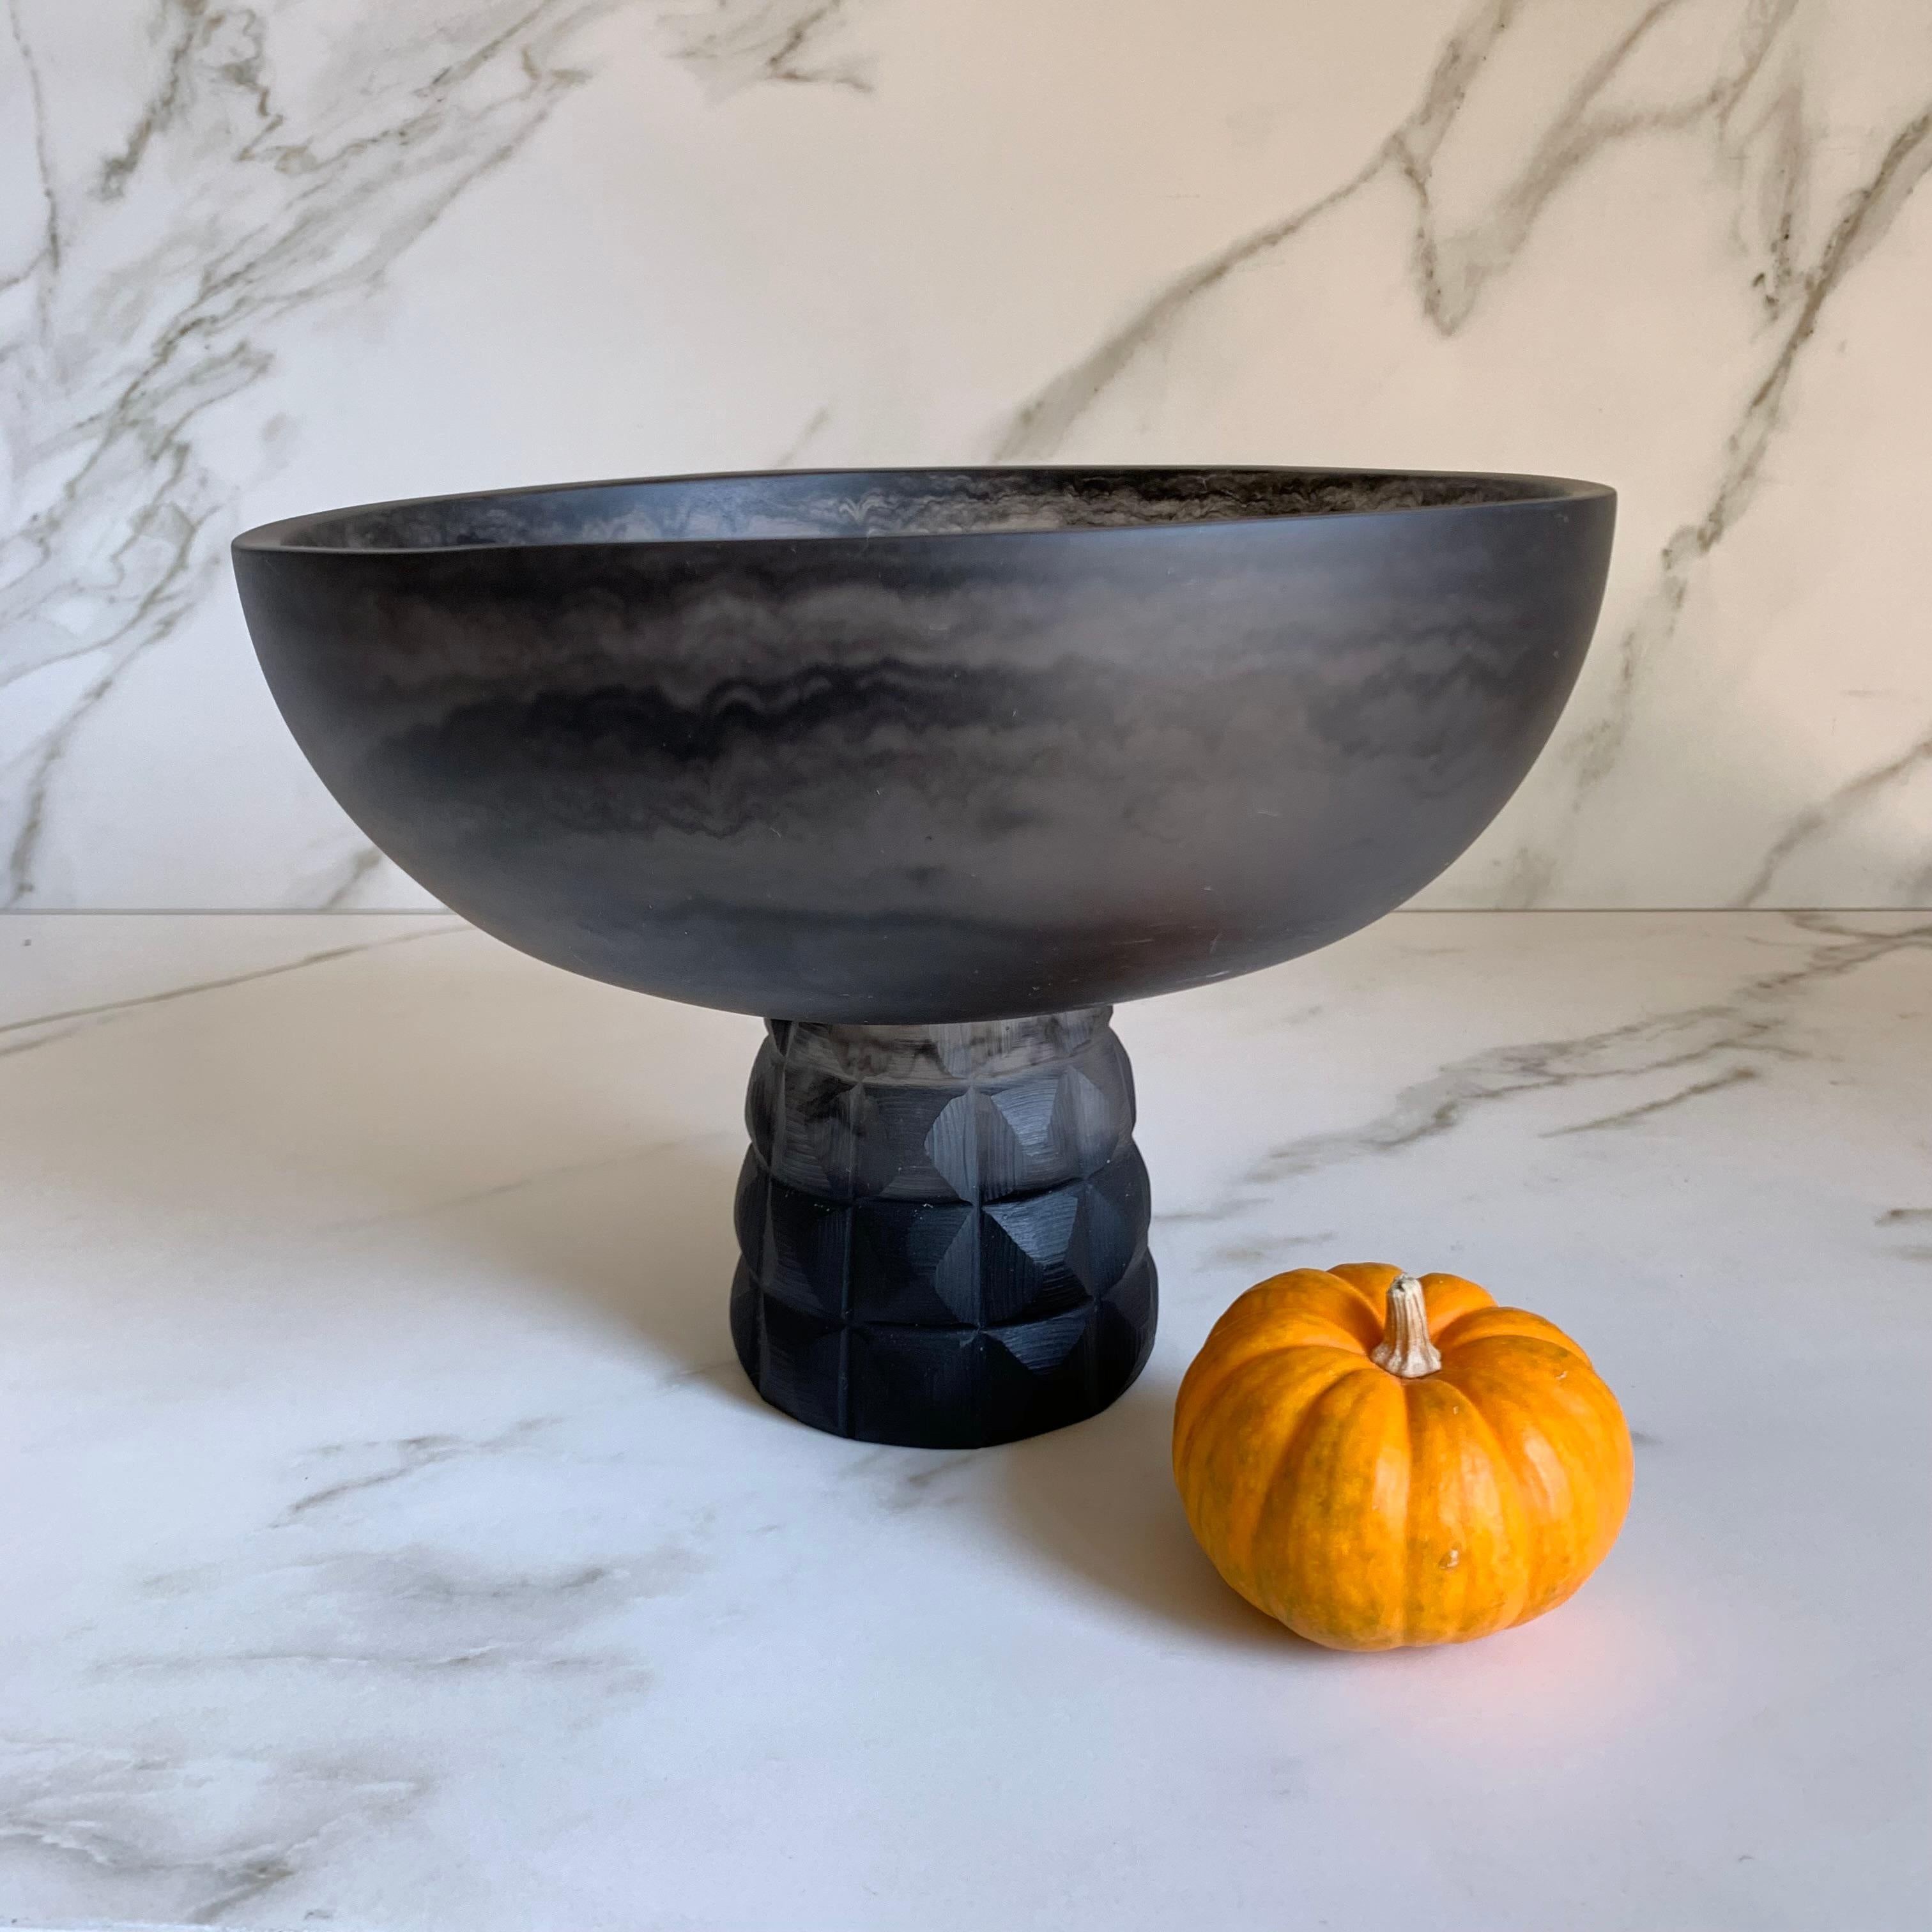 Our decorative geometric pedestal bowl is great for holding fruit, plants, decorative objects, faux succulents and specially everyone's attention. You can have it on display on a kitchen counter or use it as a centerpiece on a dining table, the